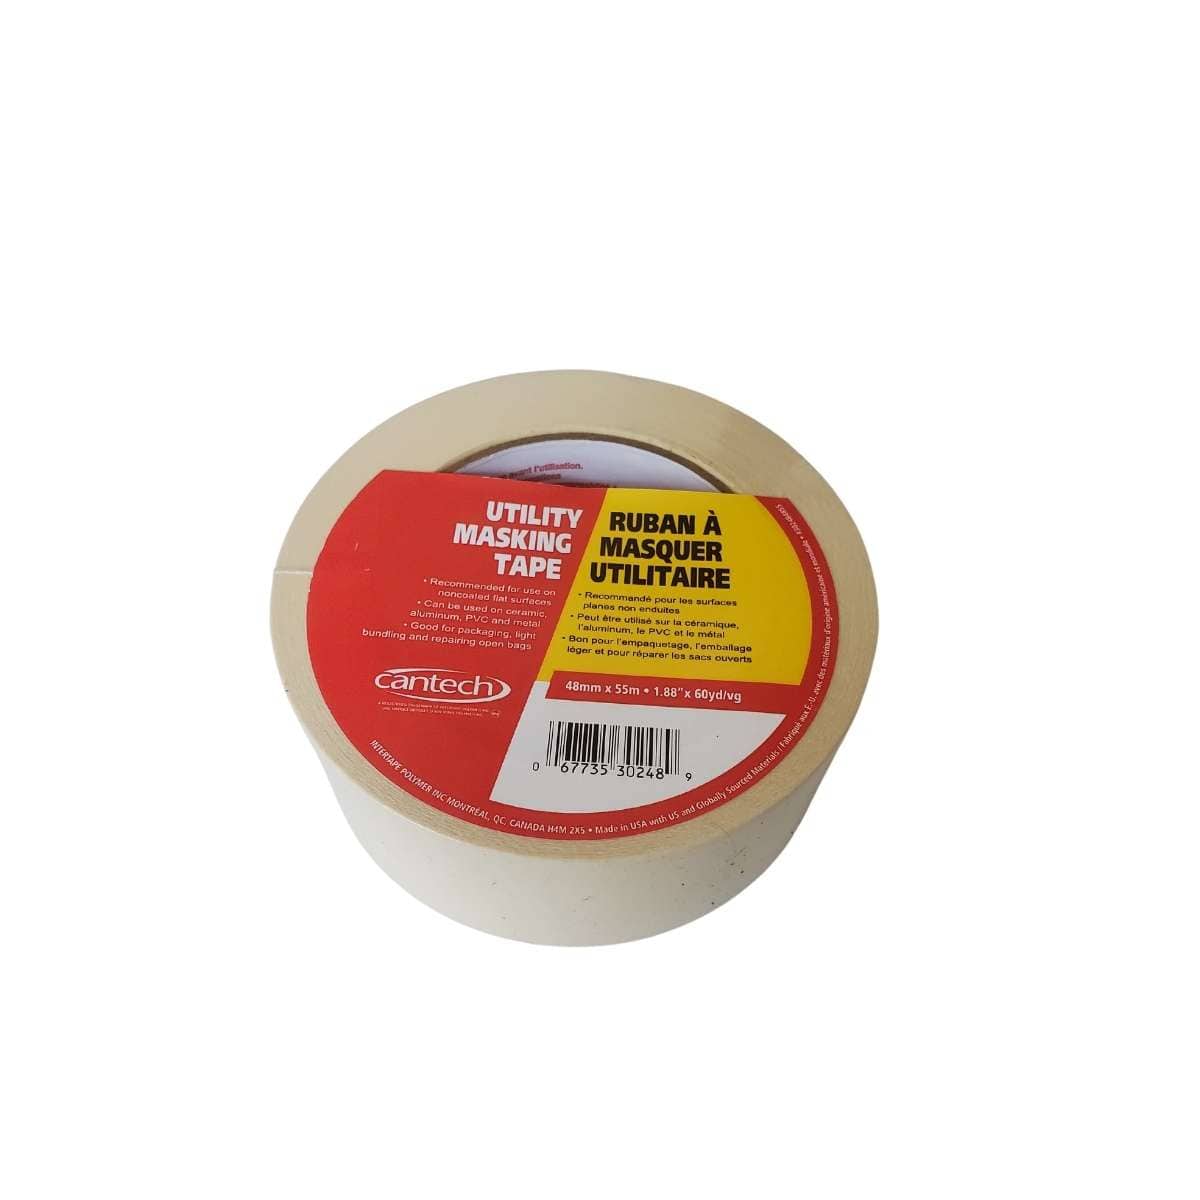 CANTECH MASKING TAPE Cantech - Utility Masking Tape - 48mm x 55m Roll - Item #302484855